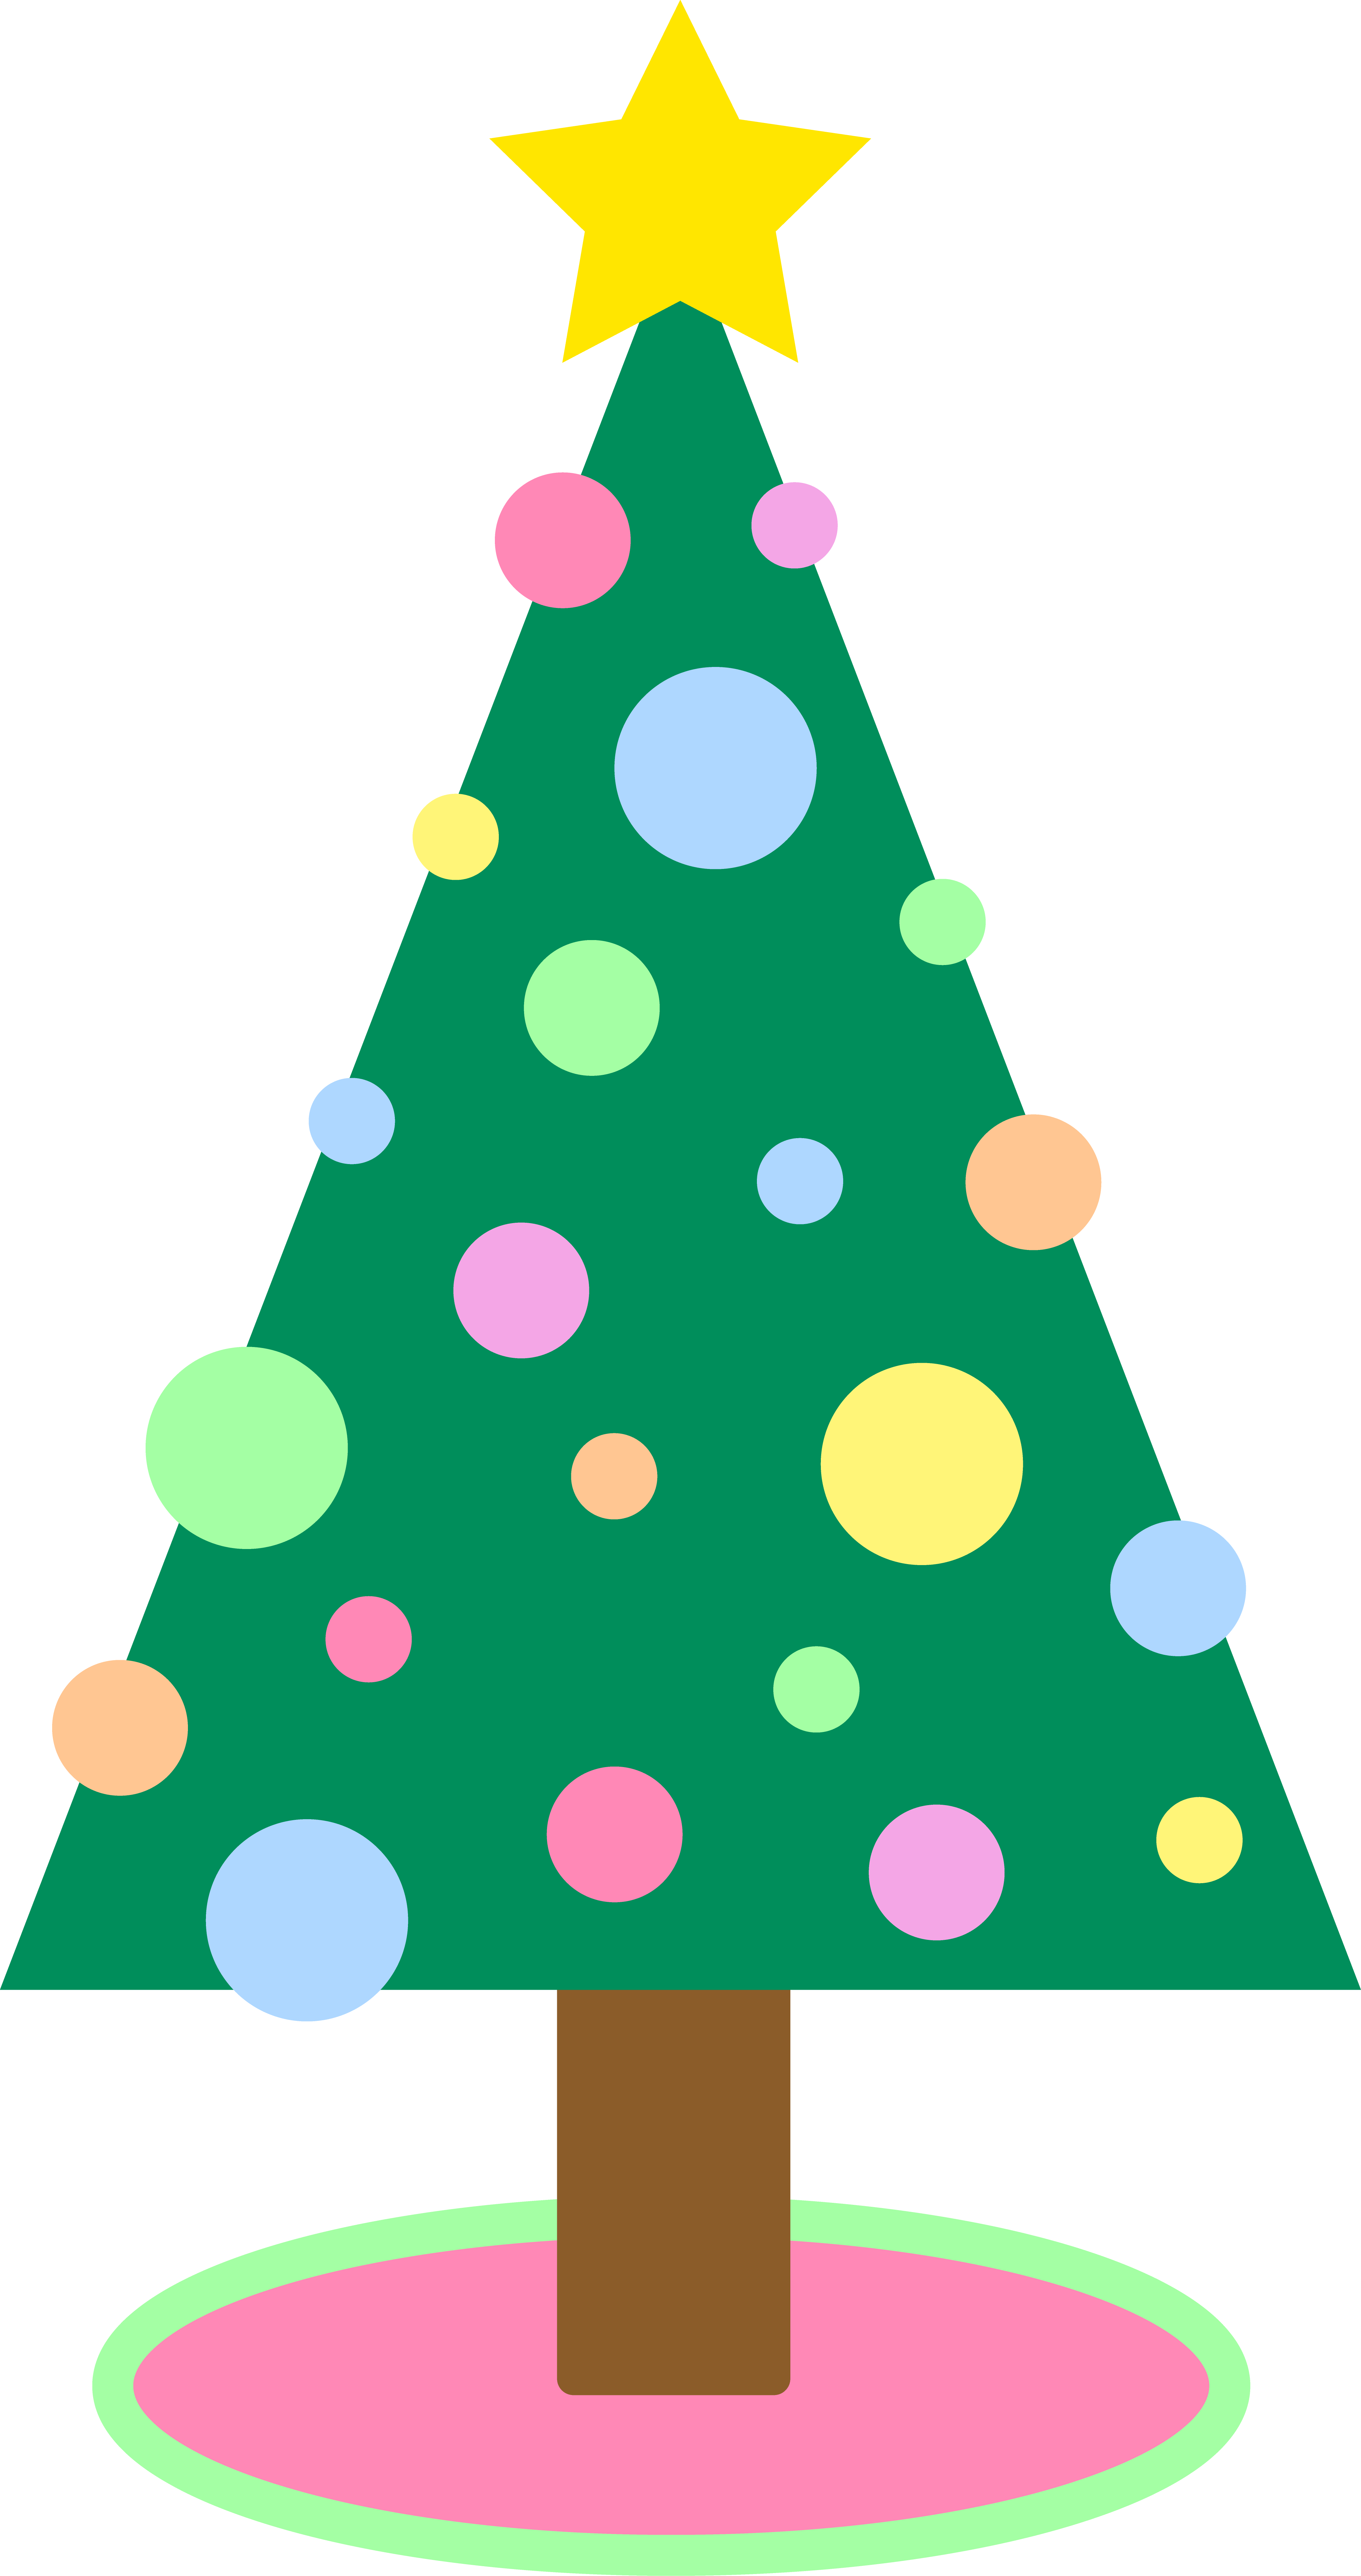 Simple Christmas Images | Free Download Clip Art | Free Clip Art ...